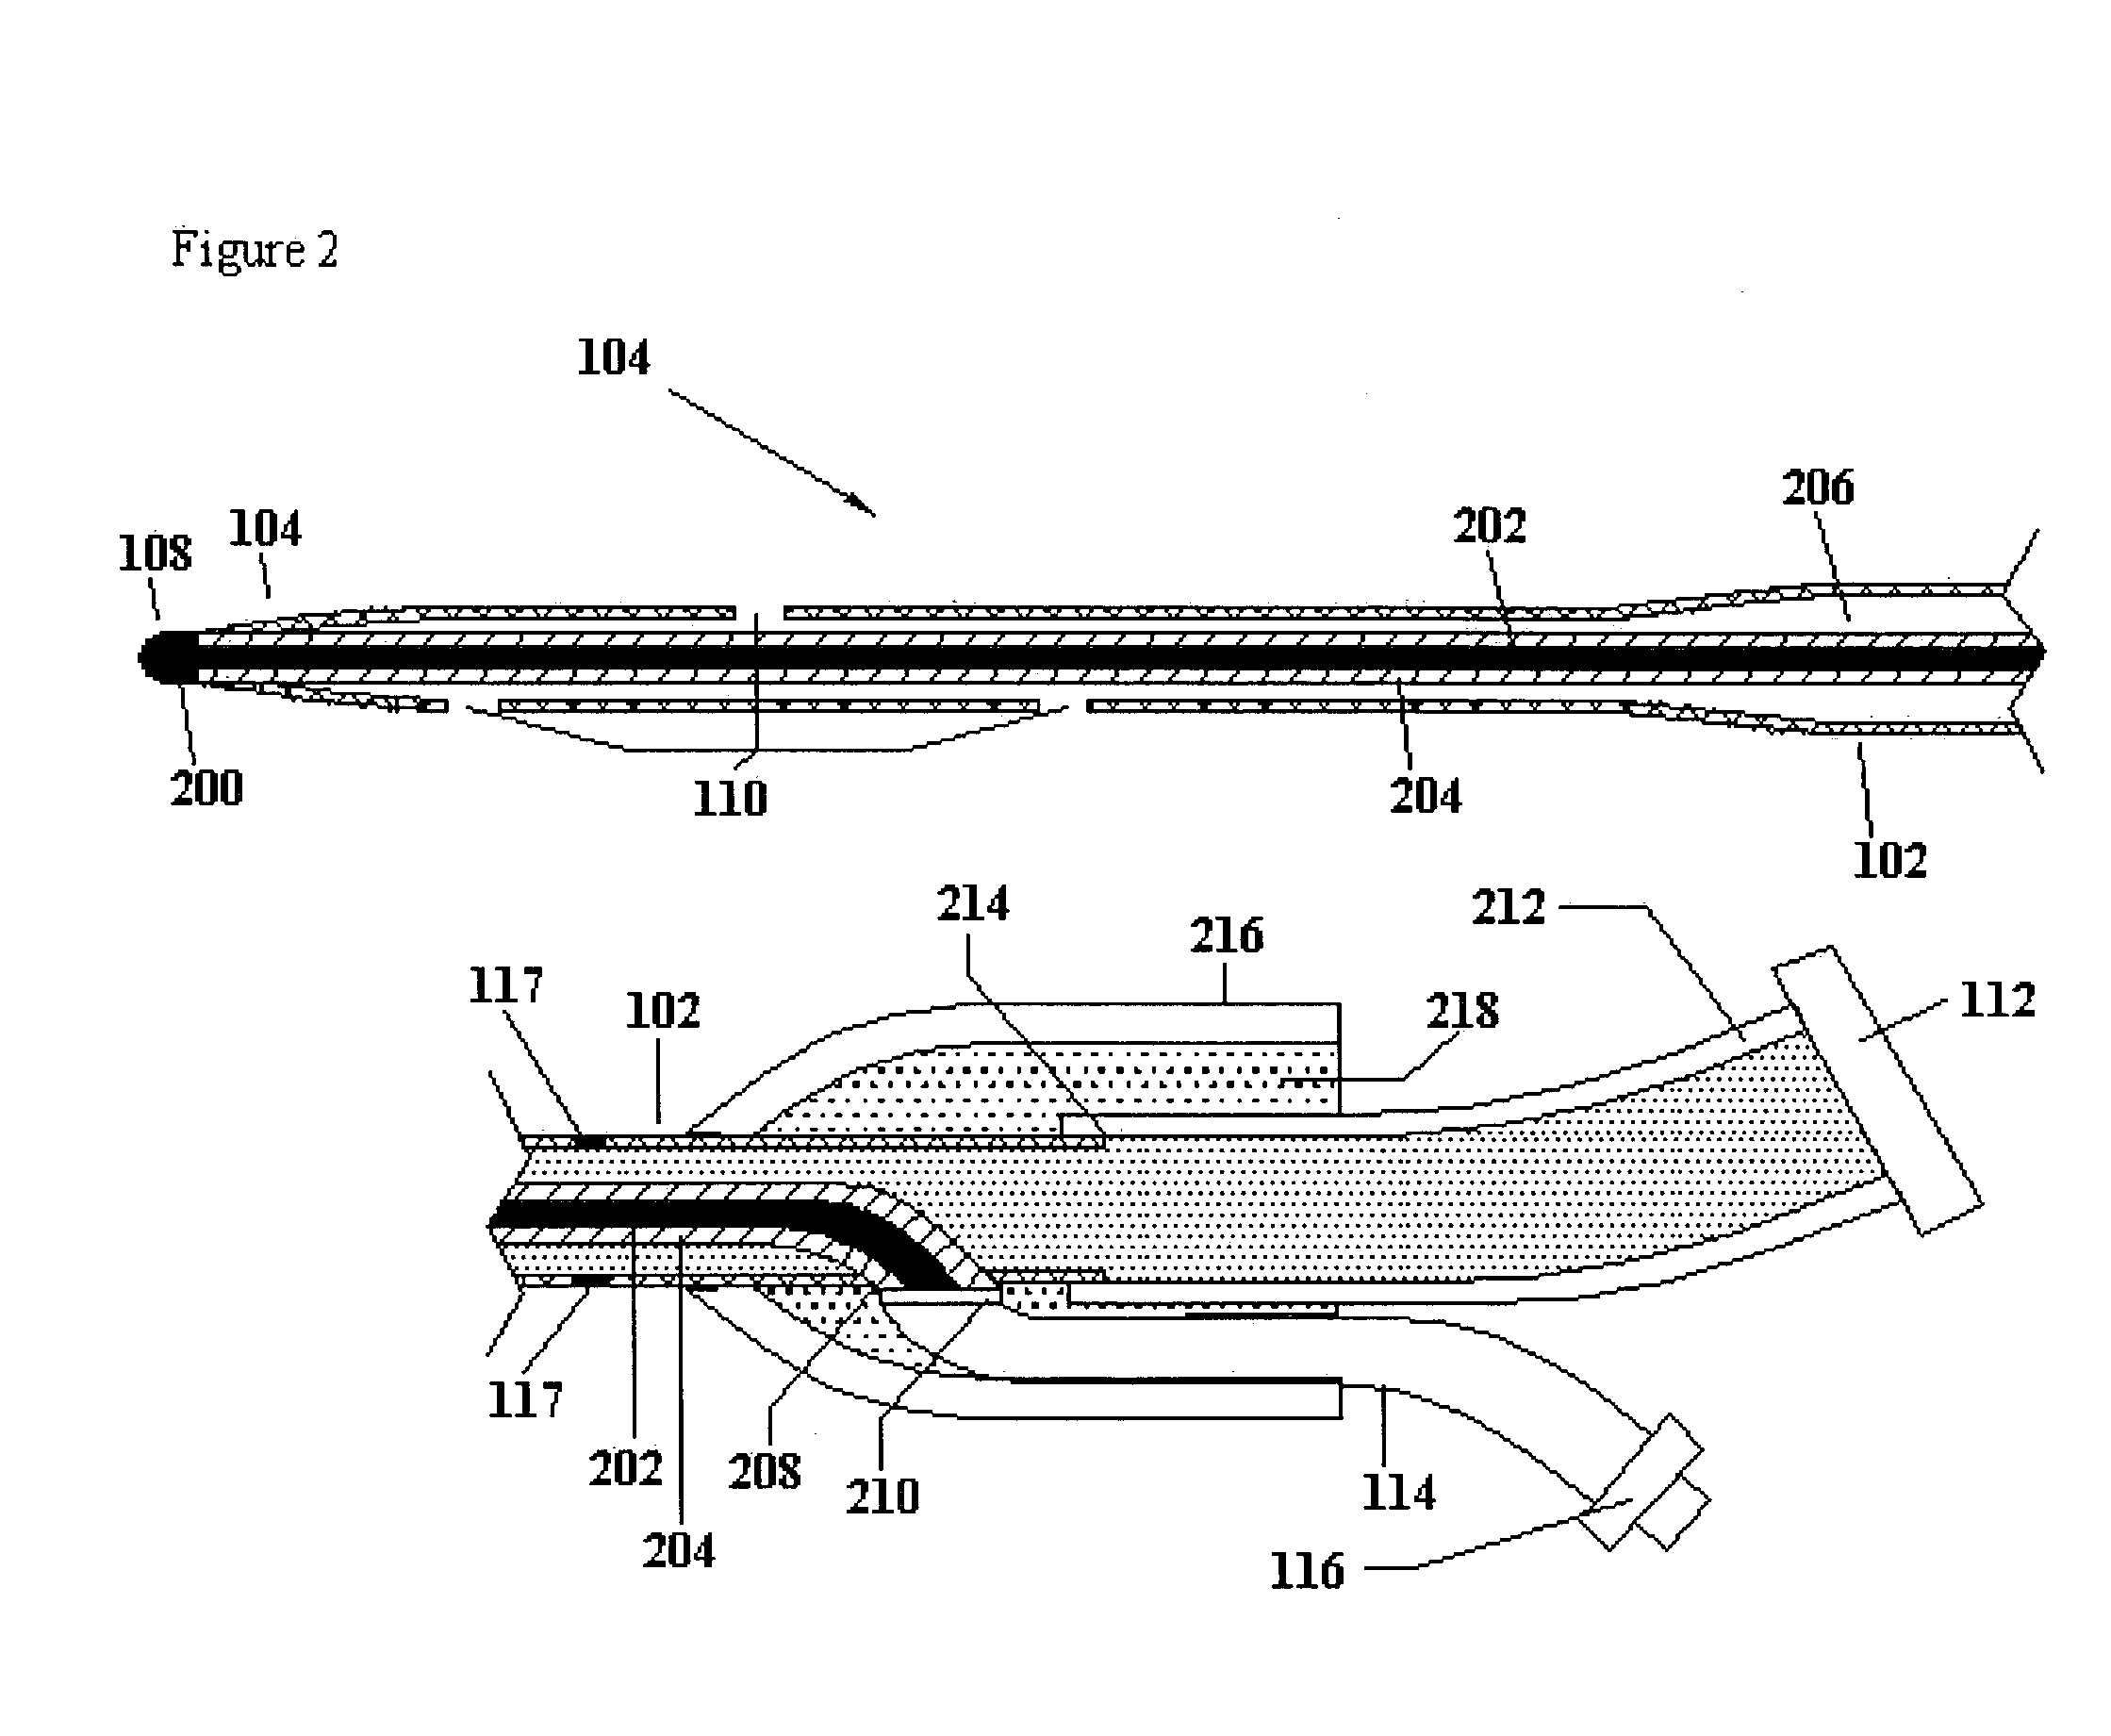 Surgical device with pressure monitoring ability